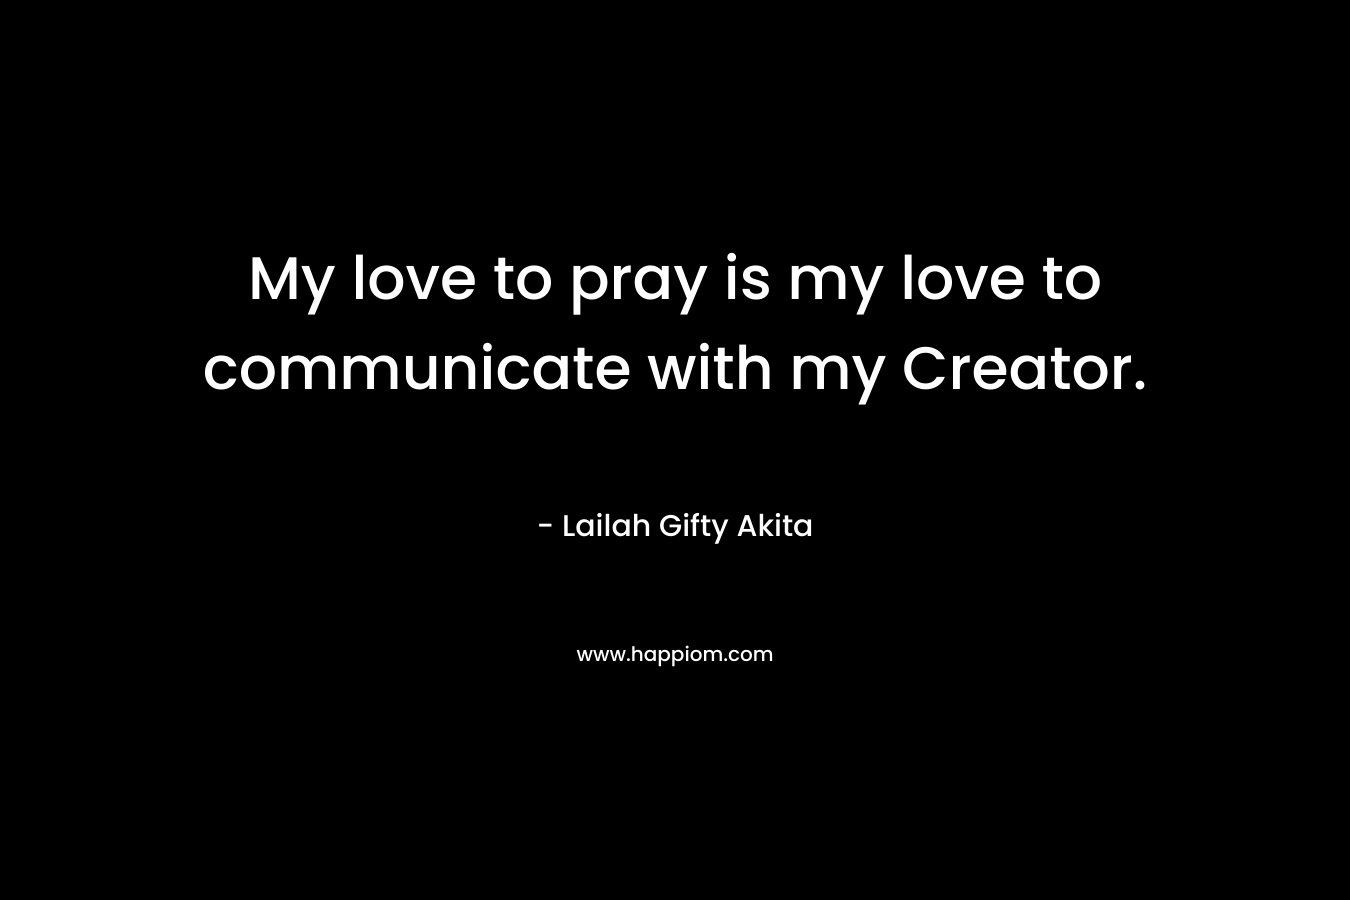 My love to pray is my love to communicate with my Creator.